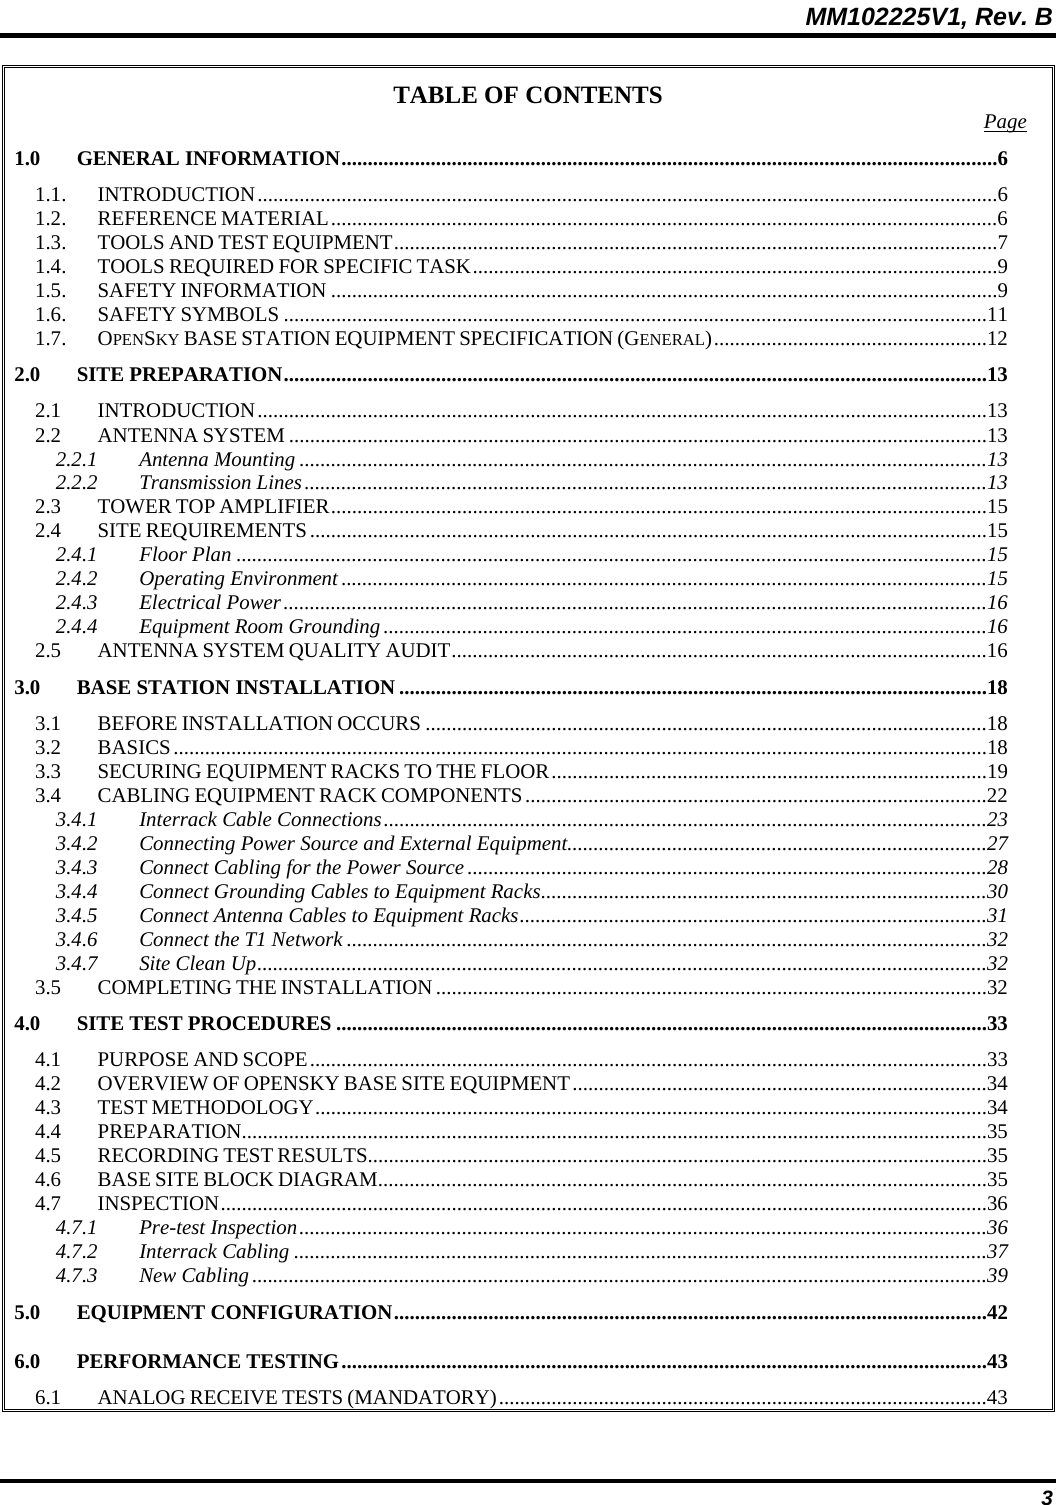 MM102225V1, Rev. B  3 TABLE OF CONTENTS  Page 1.0 GENERAL INFORMATION.............................................................................................................................6 1.1. INTRODUCTION.............................................................................................................................................6 1.2. REFERENCE MATERIAL...............................................................................................................................6 1.3. TOOLS AND TEST EQUIPMENT...................................................................................................................7 1.4. TOOLS REQUIRED FOR SPECIFIC TASK....................................................................................................9 1.5. SAFETY INFORMATION ...............................................................................................................................9 1.6. SAFETY SYMBOLS ......................................................................................................................................11 1.7. OPENSKY BASE STATION EQUIPMENT SPECIFICATION (GENERAL)....................................................12 2.0 SITE PREPARATION......................................................................................................................................13 2.1 INTRODUCTION...........................................................................................................................................13 2.2 ANTENNA SYSTEM .....................................................................................................................................13 2.2.1 Antenna Mounting ...................................................................................................................................13 2.2.2 Transmission Lines..................................................................................................................................13 2.3 TOWER TOP AMPLIFIER.............................................................................................................................15 2.4 SITE REQUIREMENTS.................................................................................................................................15 2.4.1 Floor Plan ...............................................................................................................................................15 2.4.2 Operating Environment ...........................................................................................................................15 2.4.3 Electrical Power......................................................................................................................................16 2.4.4 Equipment Room Grounding...................................................................................................................16 2.5 ANTENNA SYSTEM QUALITY AUDIT......................................................................................................16 3.0 BASE STATION INSTALLATION ................................................................................................................18 3.1 BEFORE INSTALLATION OCCURS ...........................................................................................................18 3.2 BASICS...........................................................................................................................................................18 3.3 SECURING EQUIPMENT RACKS TO THE FLOOR...................................................................................19 3.4 CABLING EQUIPMENT RACK COMPONENTS........................................................................................22 3.4.1 Interrack Cable Connections...................................................................................................................23 3.4.2 Connecting Power Source and External Equipment................................................................................27 3.4.3 Connect Cabling for the Power Source...................................................................................................28 3.4.4 Connect Grounding Cables to Equipment Racks.....................................................................................30 3.4.5 Connect Antenna Cables to Equipment Racks.........................................................................................31 3.4.6 Connect the T1 Network ..........................................................................................................................32 3.4.7 Site Clean Up...........................................................................................................................................32 3.5 COMPLETING THE INSTALLATION.........................................................................................................32 4.0 SITE TEST PROCEDURES ............................................................................................................................33 4.1 PURPOSE AND SCOPE.................................................................................................................................33 4.2 OVERVIEW OF OPENSKY BASE SITE EQUIPMENT...............................................................................34 4.3 TEST METHODOLOGY................................................................................................................................34 4.4 PREPARATION..............................................................................................................................................35 4.5 RECORDING TEST RESULTS......................................................................................................................35 4.6 BASE SITE BLOCK DIAGRAM....................................................................................................................35 4.7 INSPECTION..................................................................................................................................................36 4.7.1 Pre-test Inspection...................................................................................................................................36 4.7.2 Interrack Cabling ....................................................................................................................................37 4.7.3 New Cabling............................................................................................................................................39 5.0 EQUIPMENT CONFIGURATION.................................................................................................................42 6.0 PERFORMANCE TESTING...........................................................................................................................43 6.1 ANALOG RECEIVE TESTS (MANDATORY).............................................................................................43 